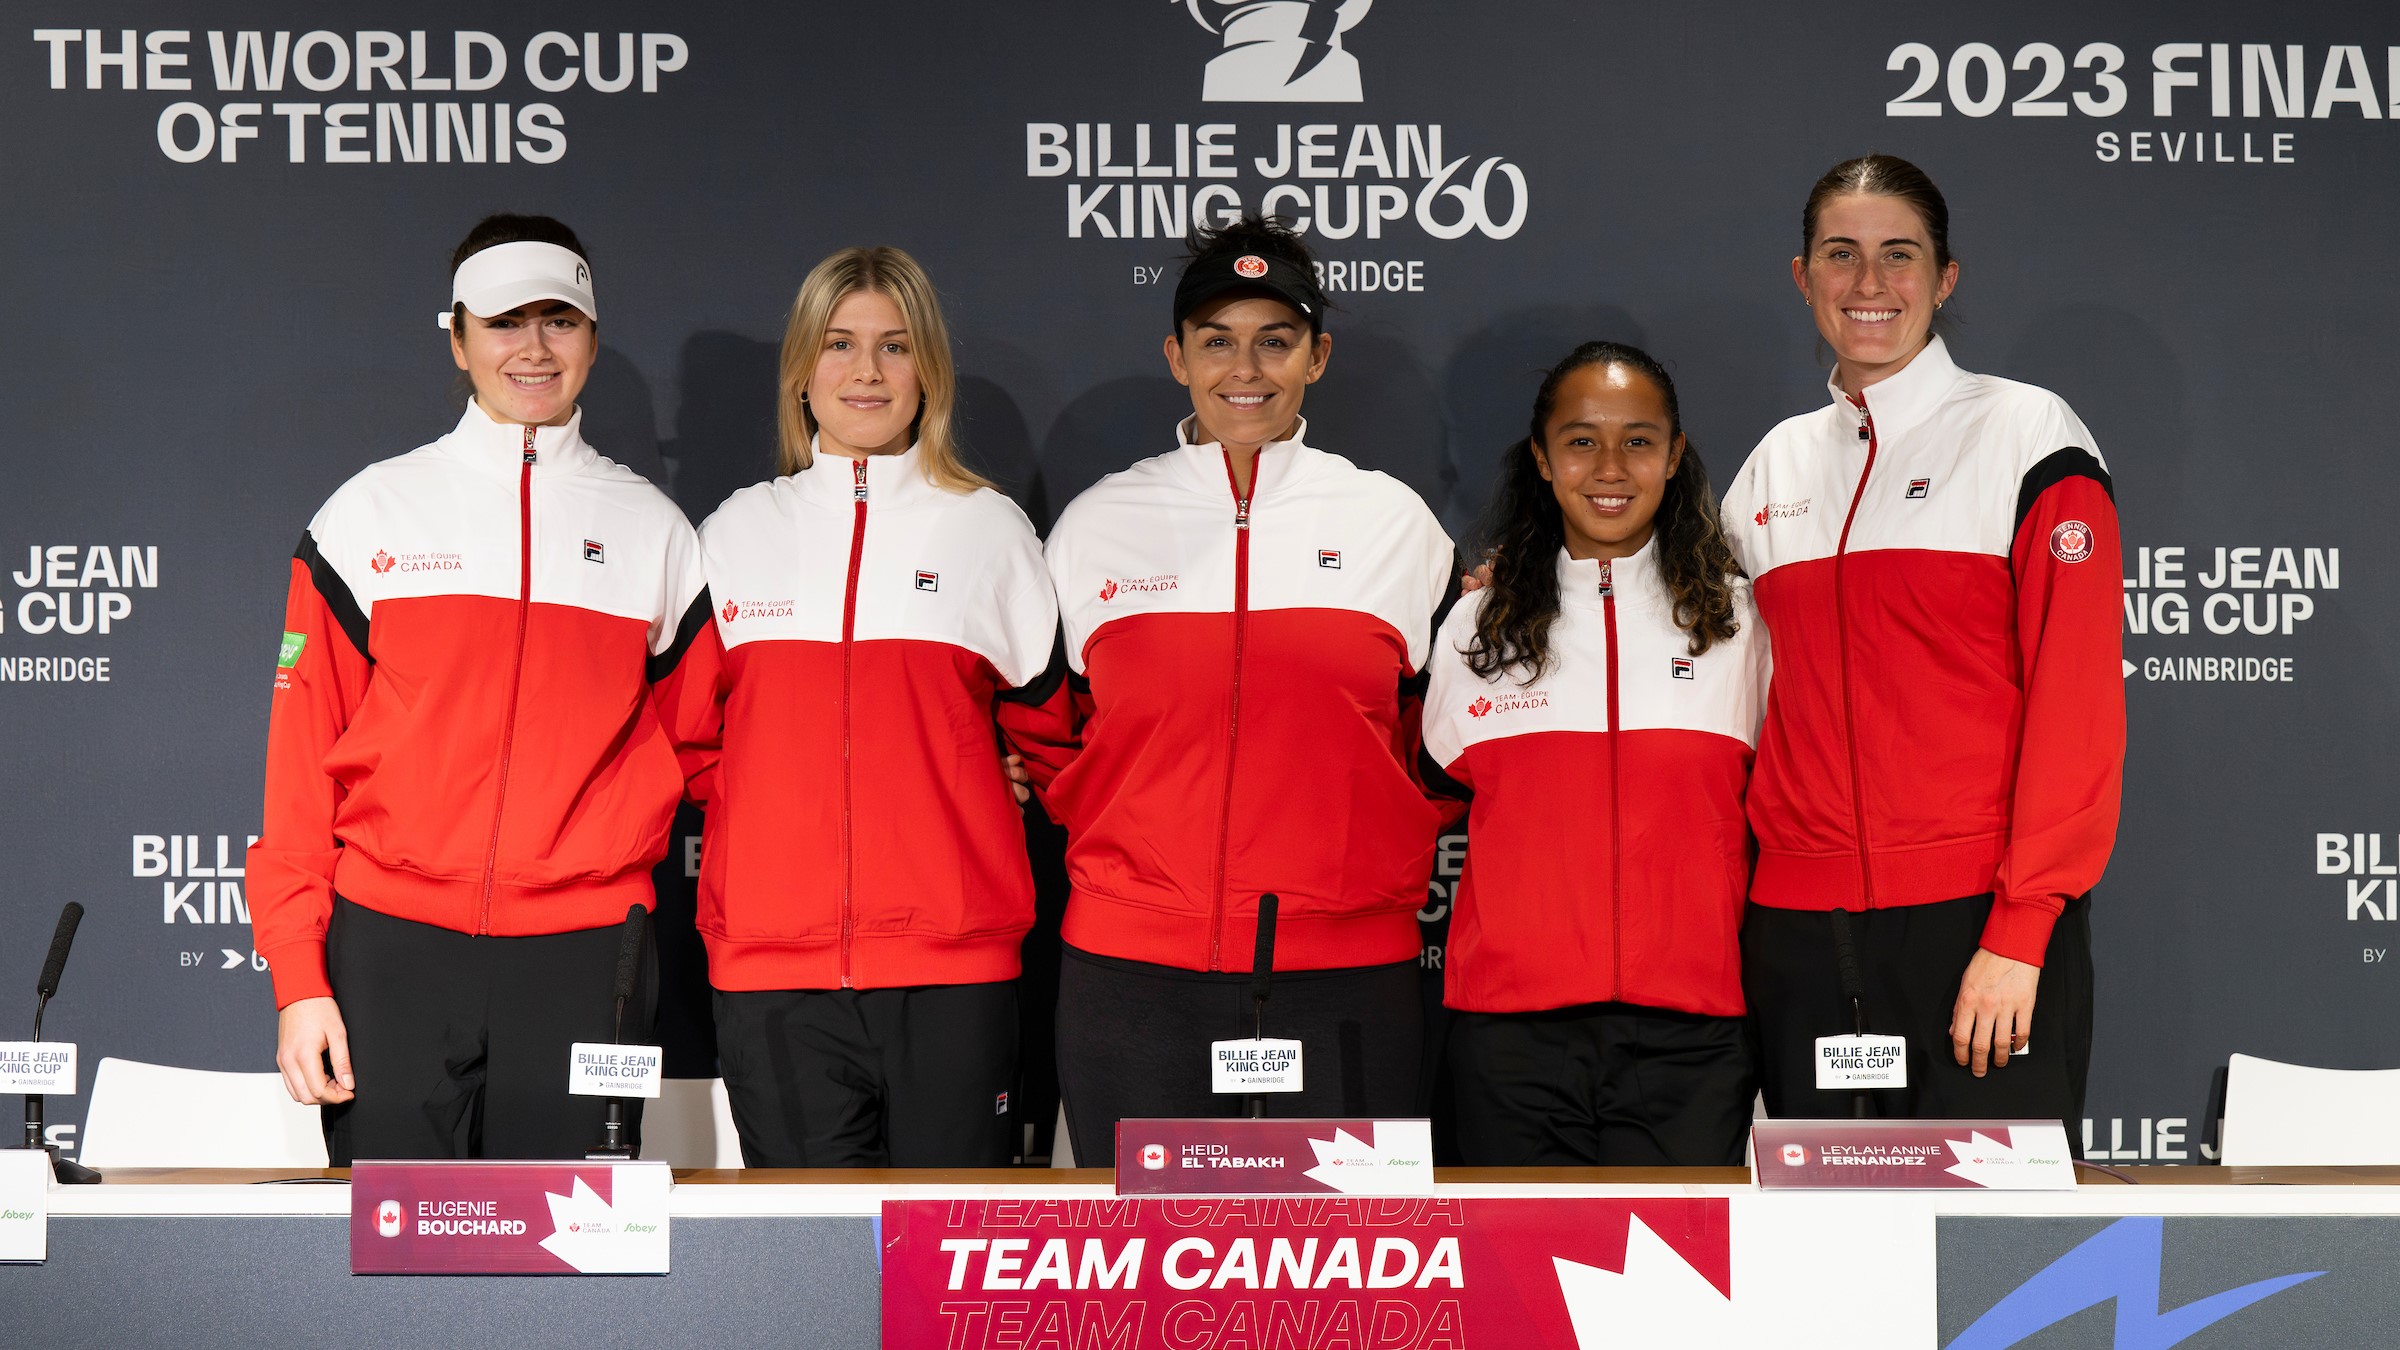 Team Canada Relishing Opportunity at Billie Jean King Cup in Spain